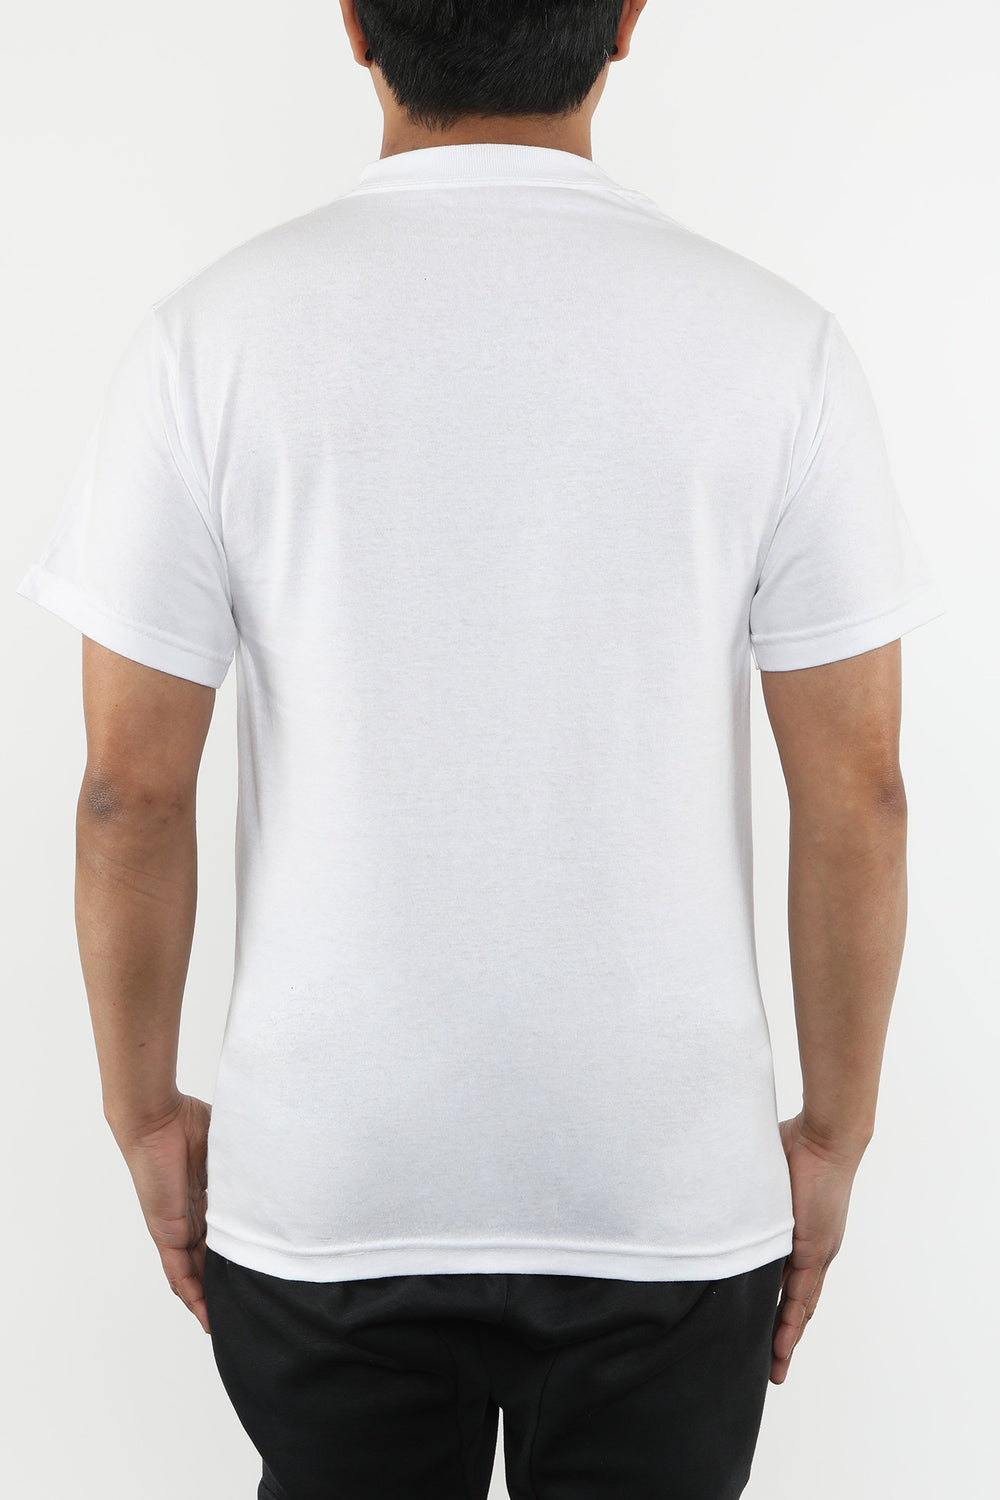 Grizzly Purveyor T-Shirt White